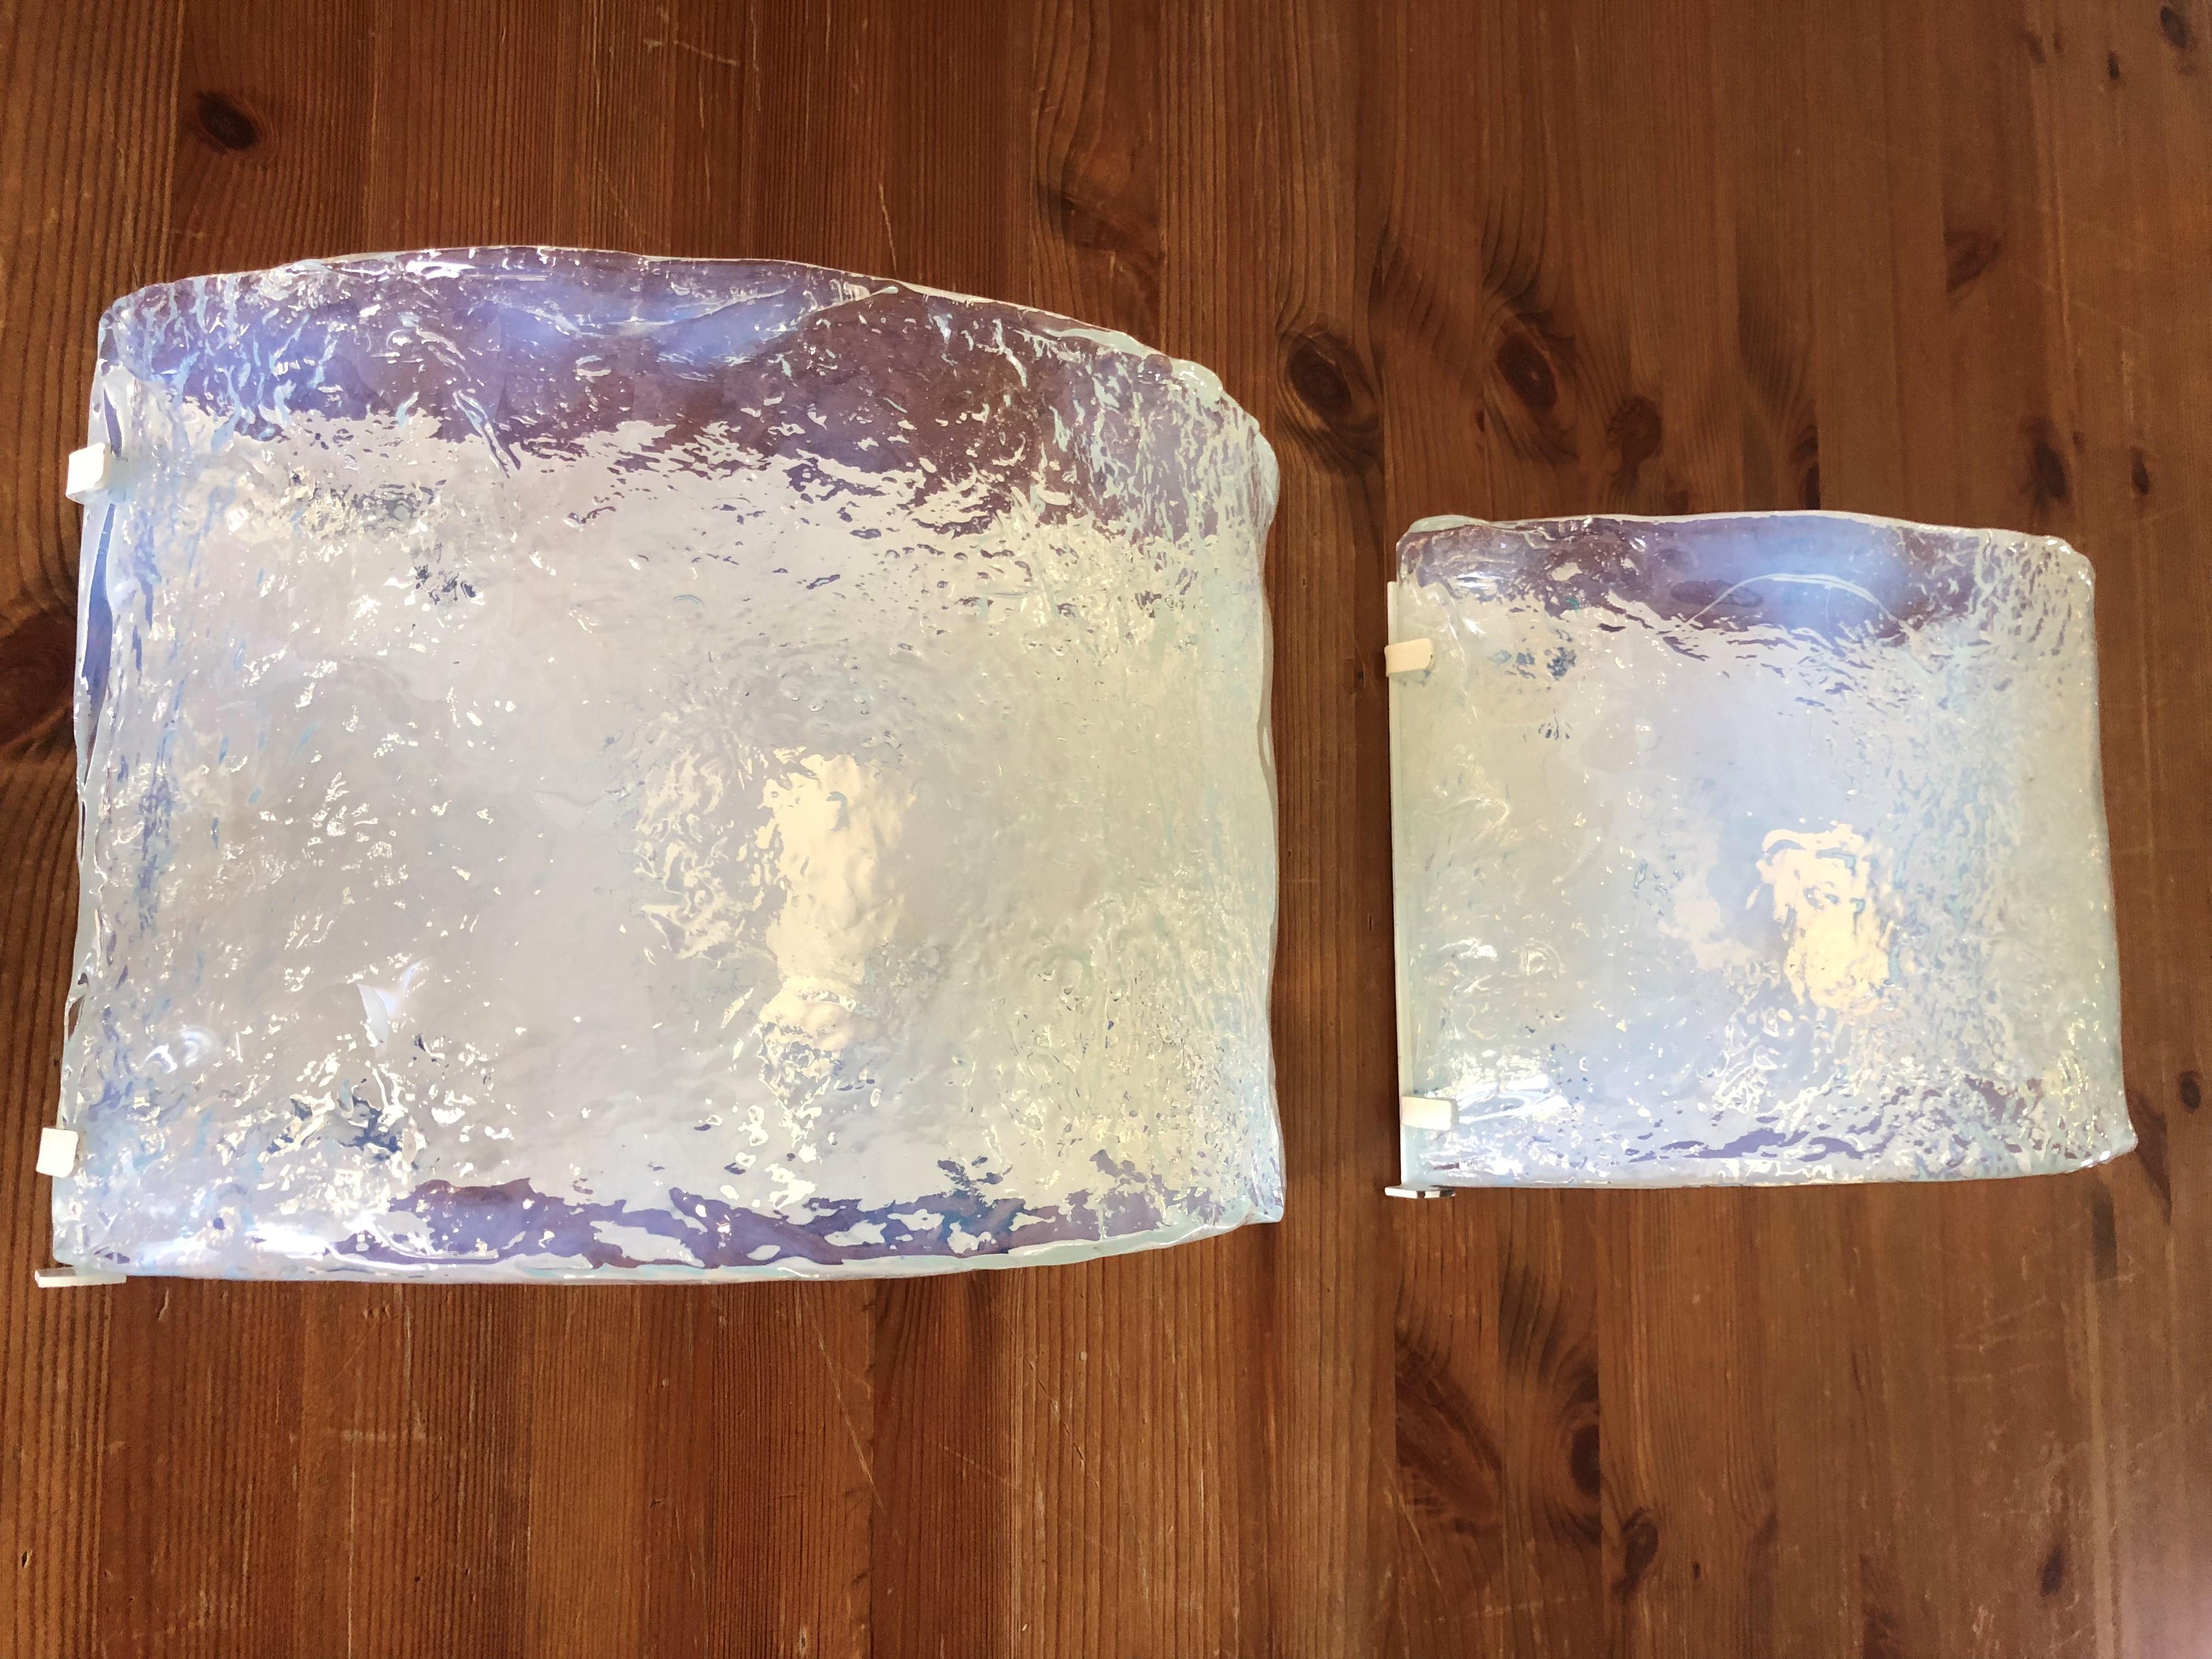 Cool and unique Set of Italian Iridescent Murano glass Wall Sconces from 1970s by Carlo Nason. These Sconces were made during the 1970s in Italy for the Venice Company “A.V .Mazzega”.
“A.V Mazzega” original sticker label still shows on the murano